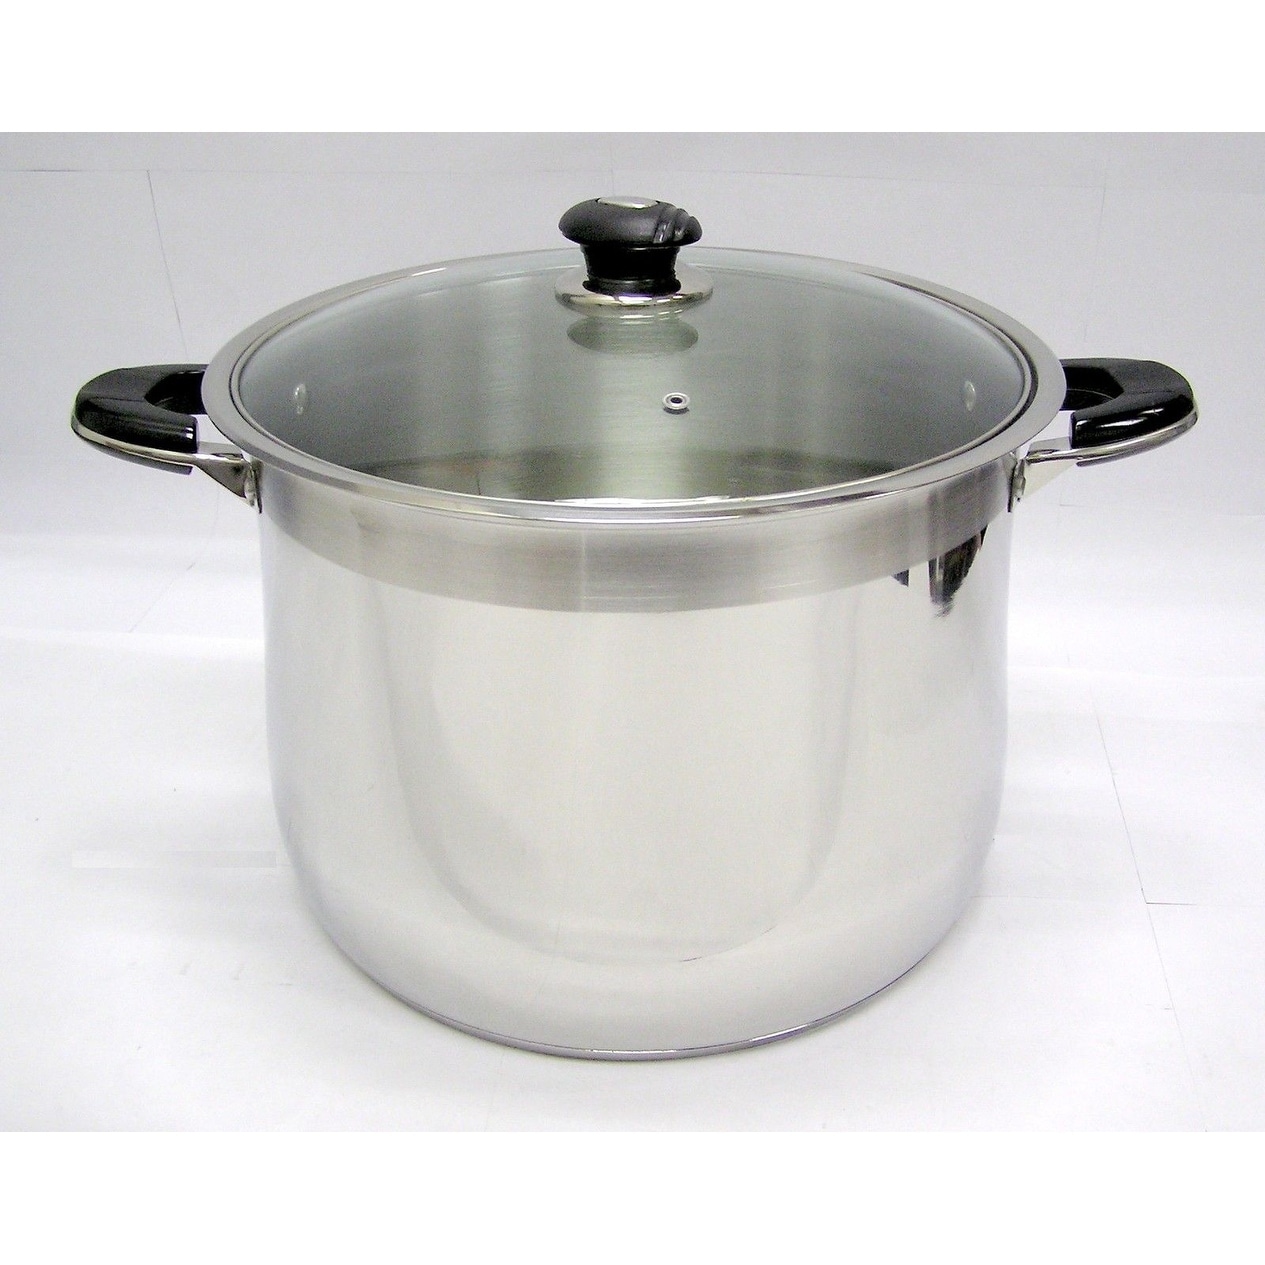 https://ak1.ostkcdn.com/images/products/is/images/direct/d058f4911222c7e8a7005cf8b125b8a8934ffbdf/20-Qt-Stainless-Steel-Tri-Ply-Clad-Heavy-Duty-Gourmet-Stock-Pot.jpg